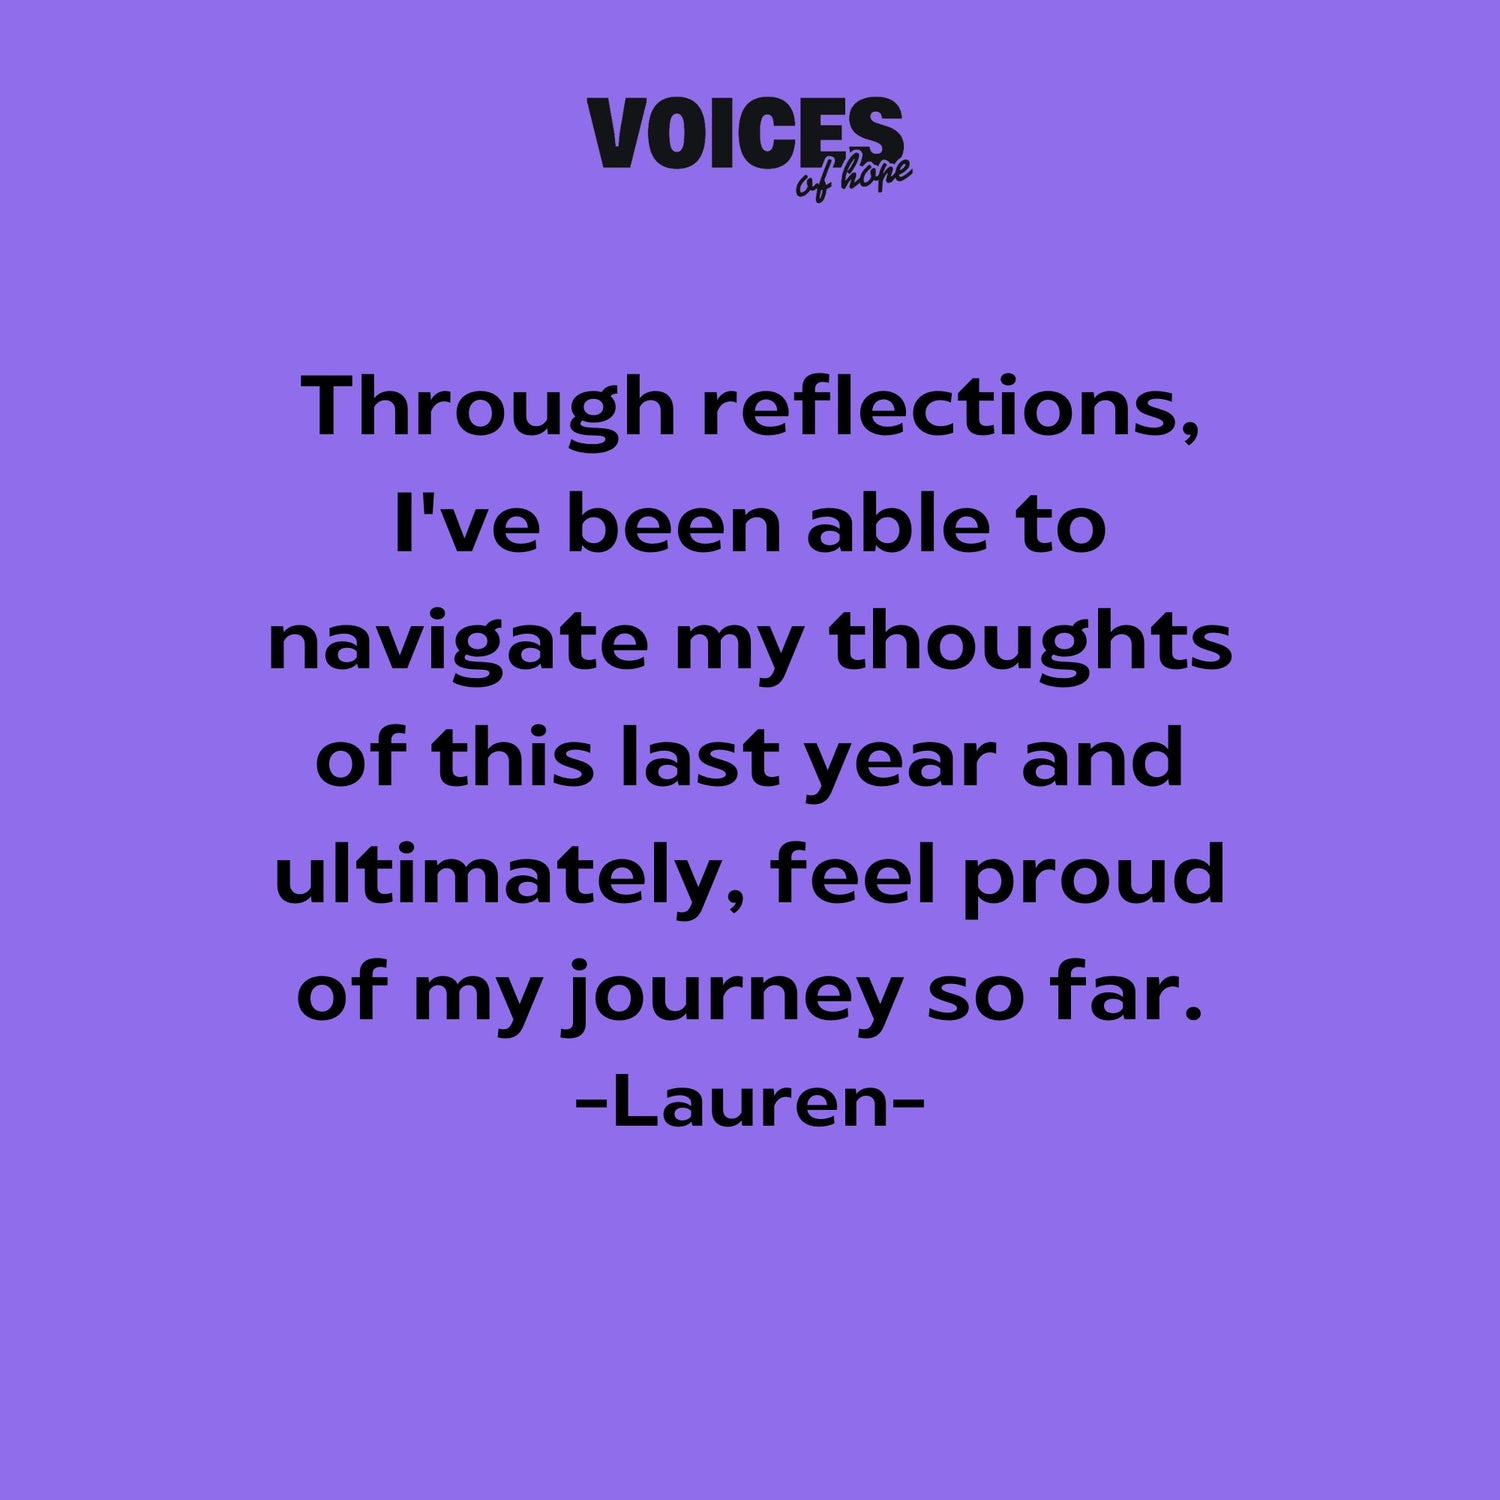 Purple background with black writing that reads: "through reflections, I've been able to navigate my thoughts of this last year and ultimately, feel proud of my journey so far. Lauren."